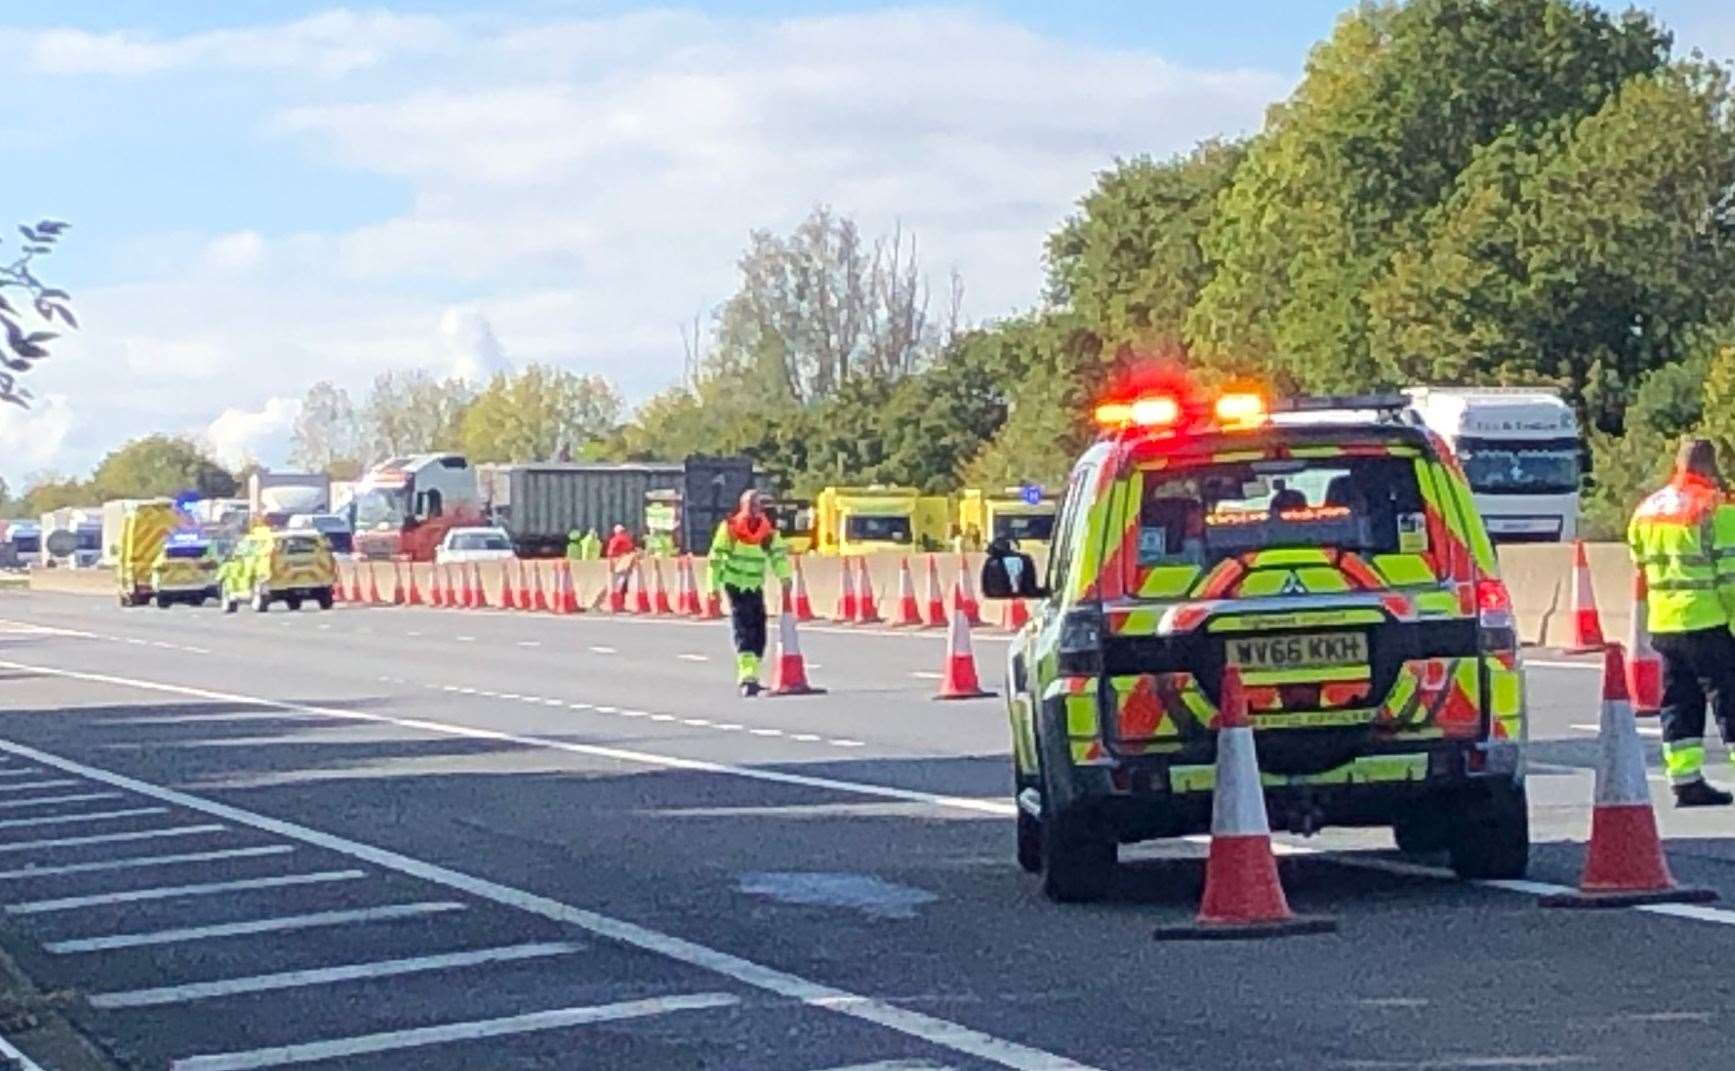 Emergency services at the scene of the crash on the M26 on Thursday